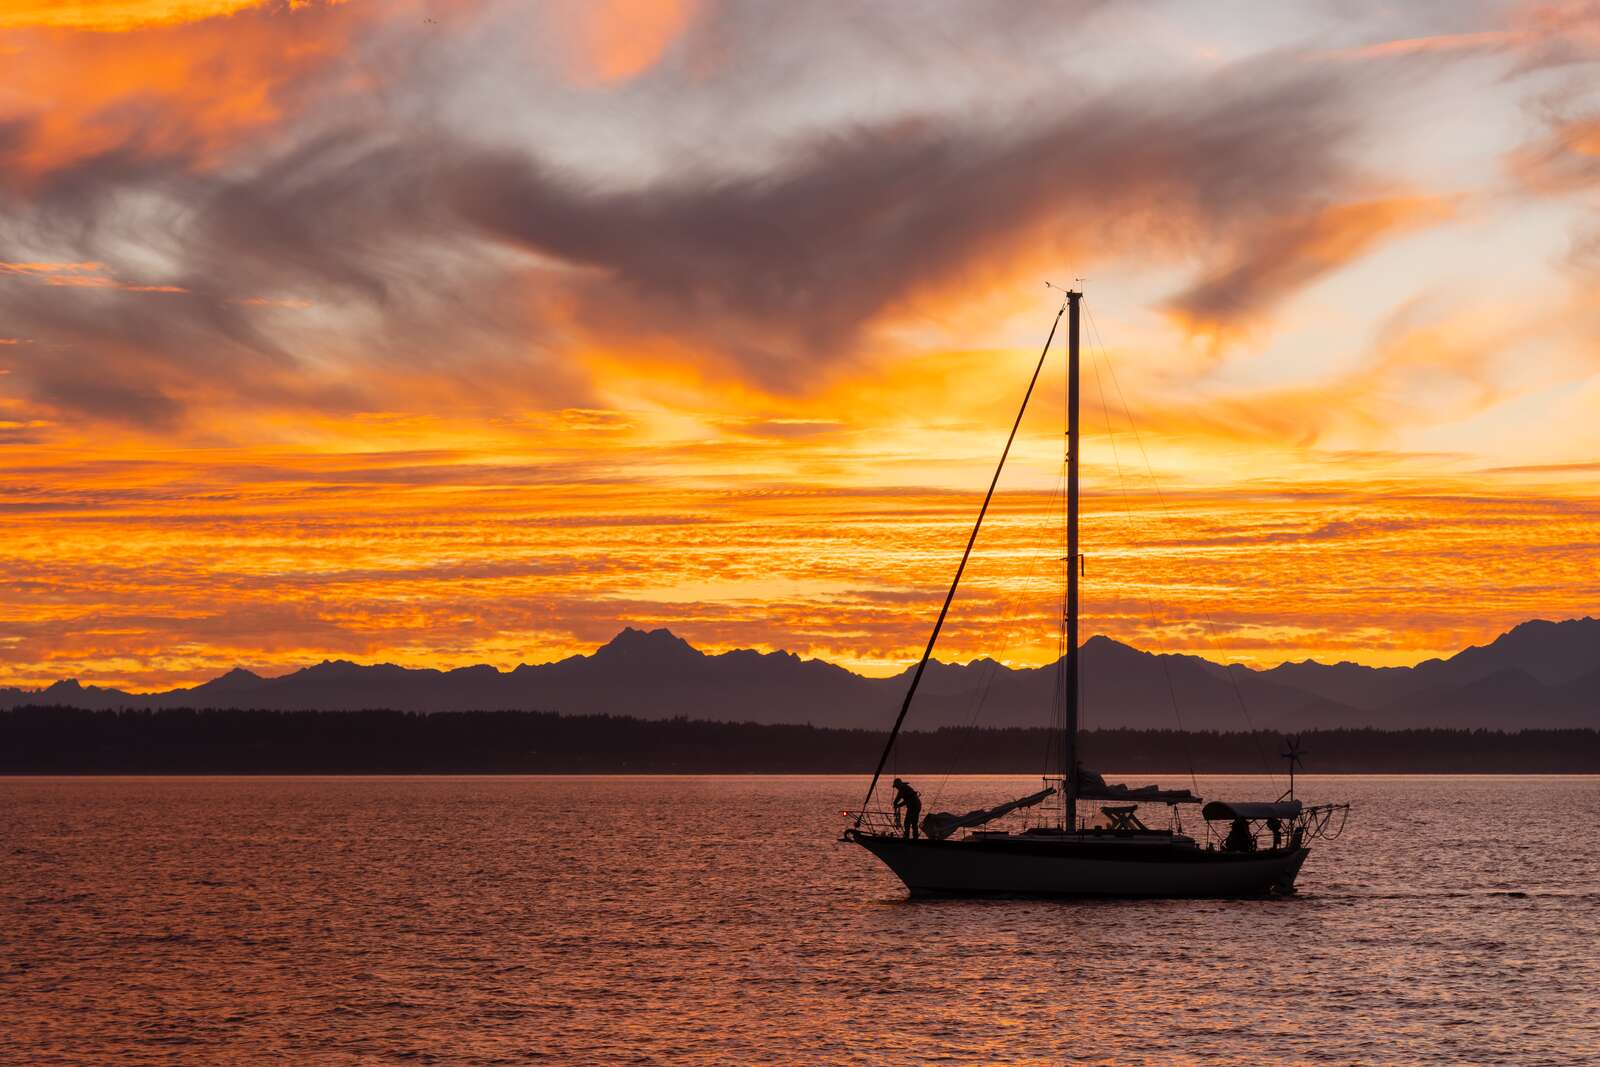 Boat sailing in front of sunset over the Olympic Peninsula